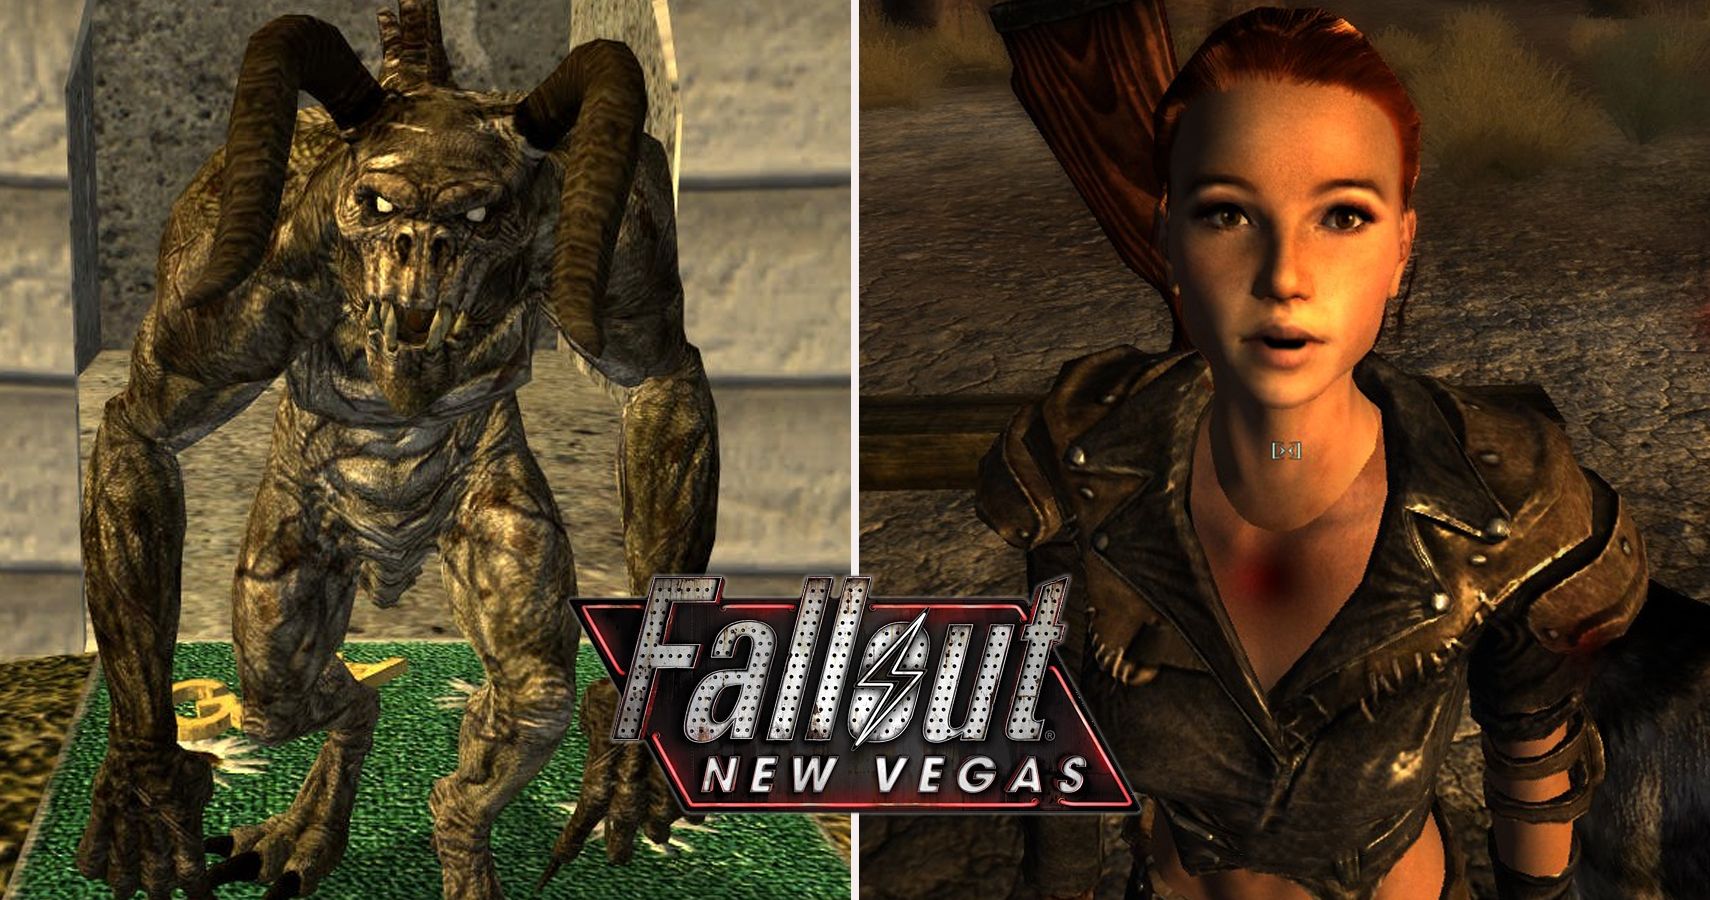 Fallout new vegas no not much